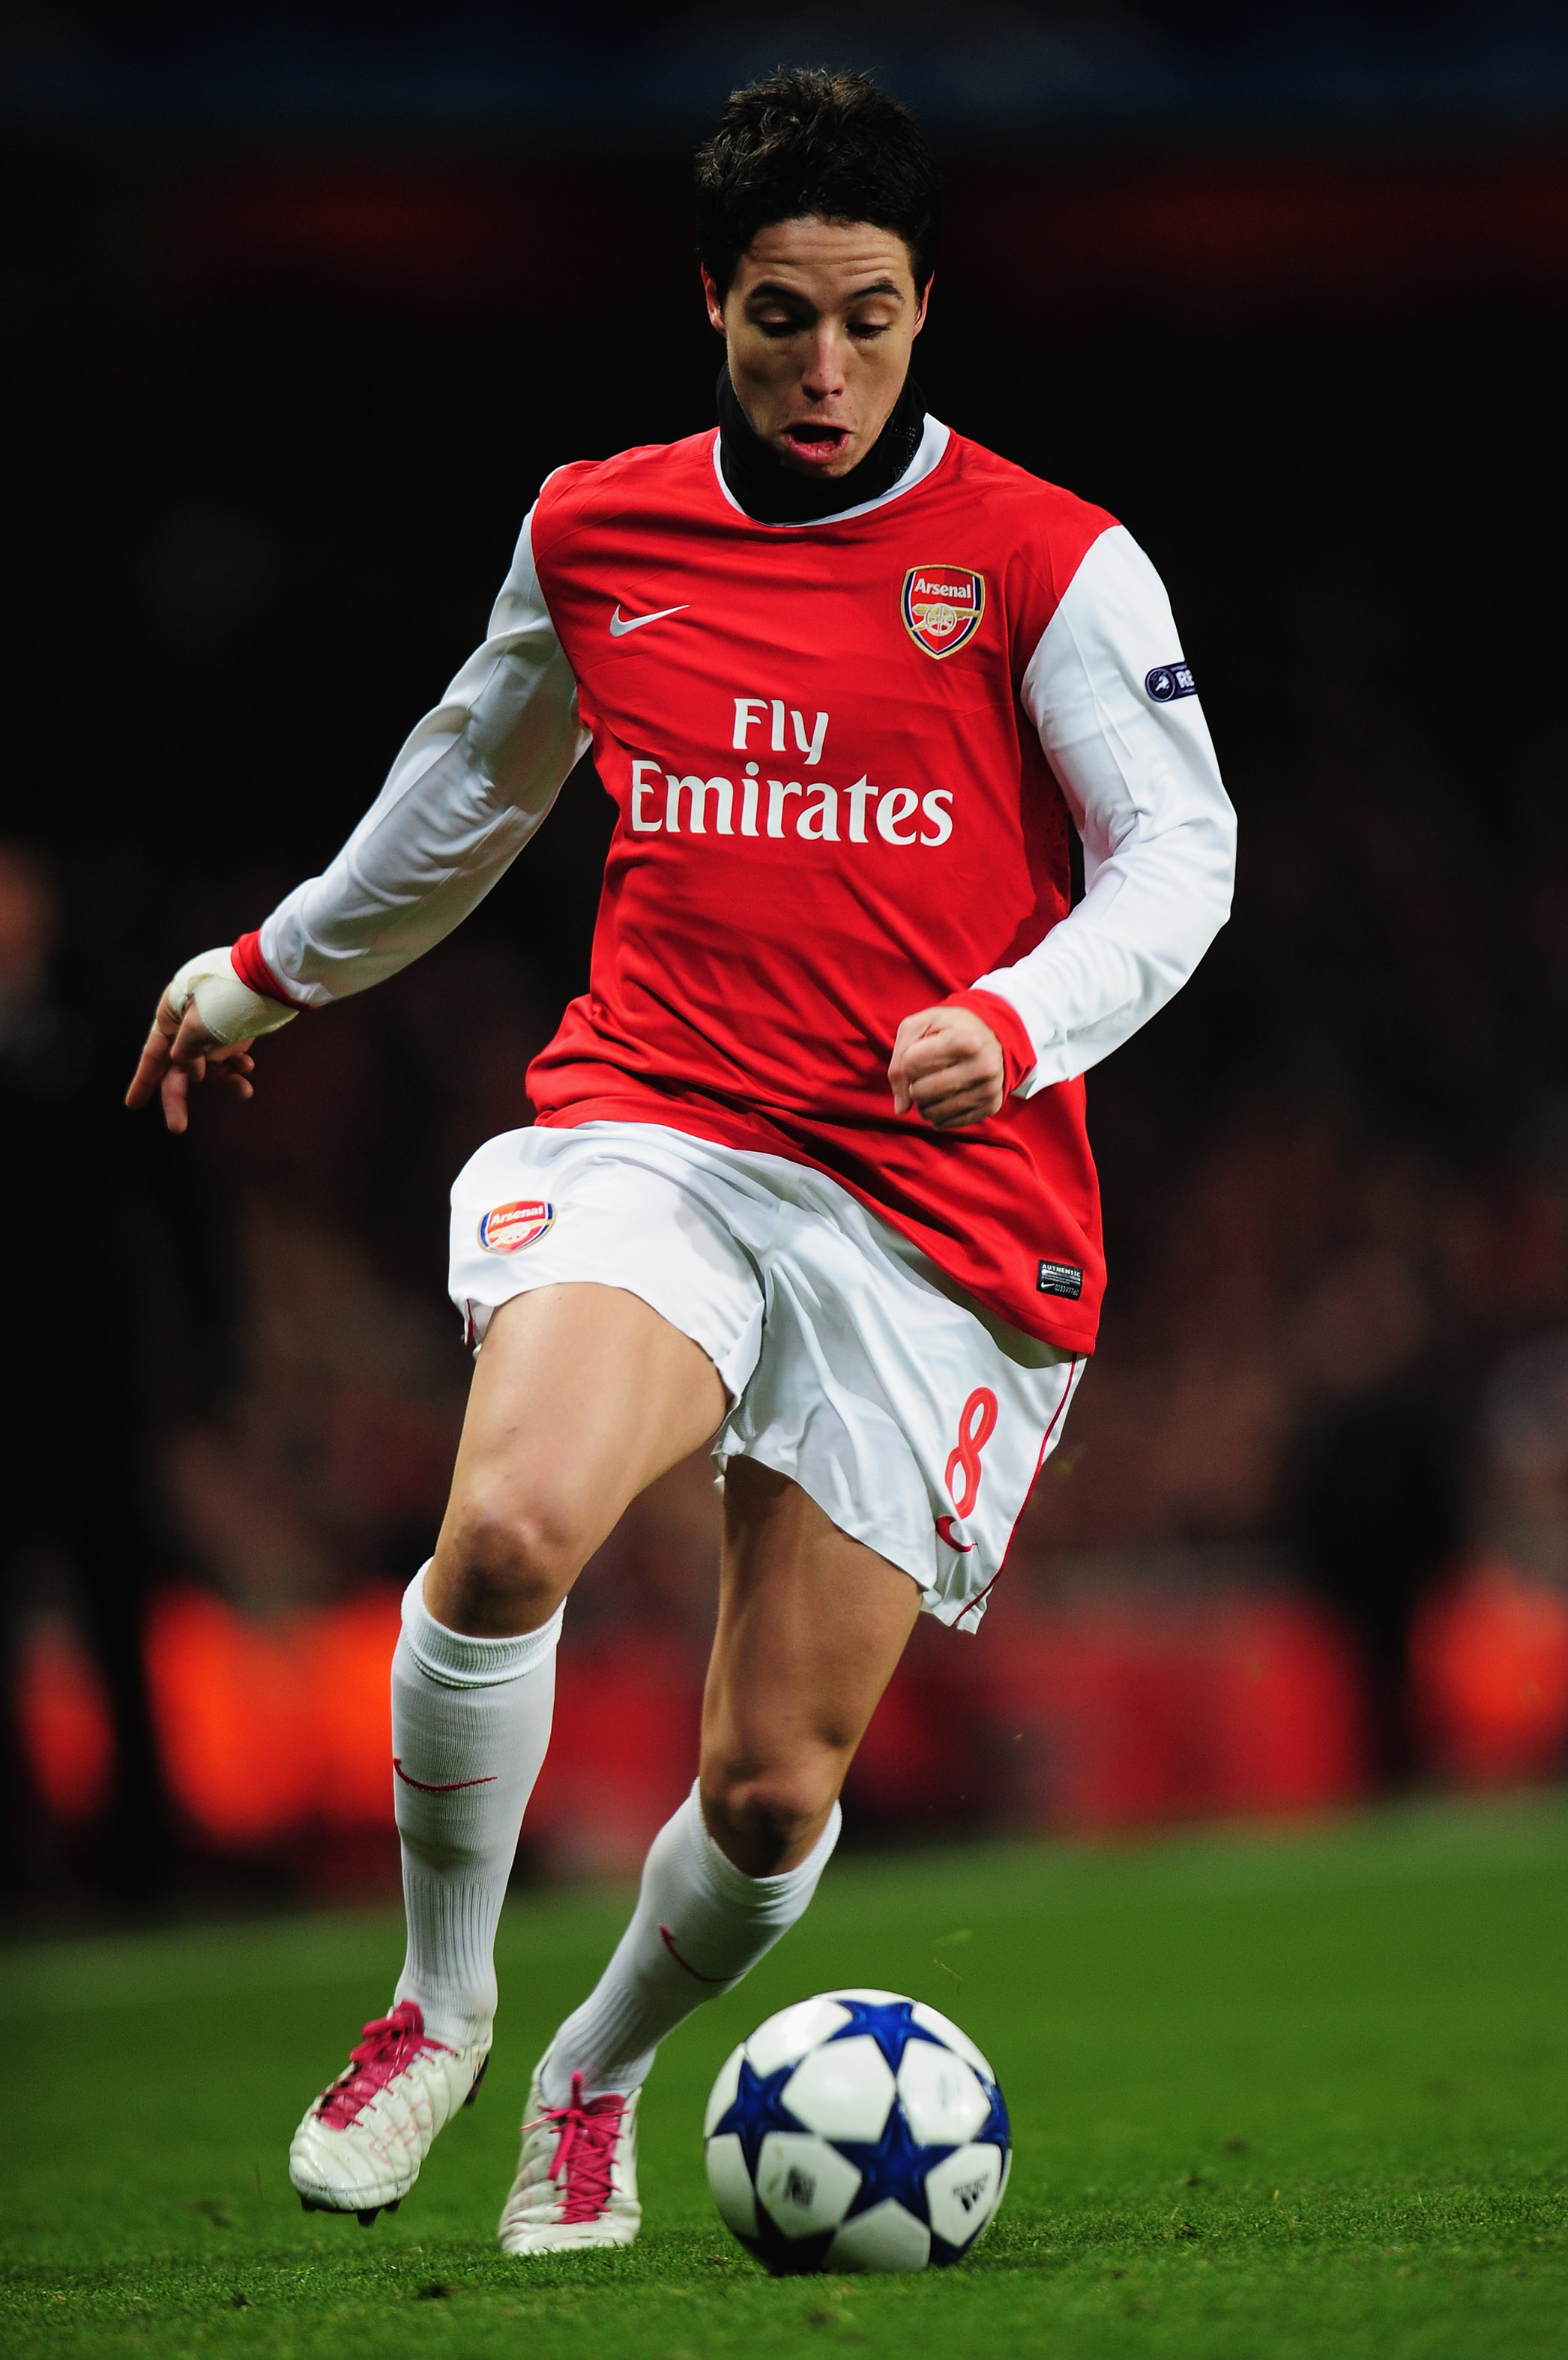 LONDON, ENGLAND - DECEMBER 08:  Samir Nasri of Arsenal in action during the UEFA Champions League Group H match between Arsenal and FK Partizan Belgrade at the Emirates Stadium on December 8, 2010 in London, England.  (Photo by Shaun Botterill/Getty Image